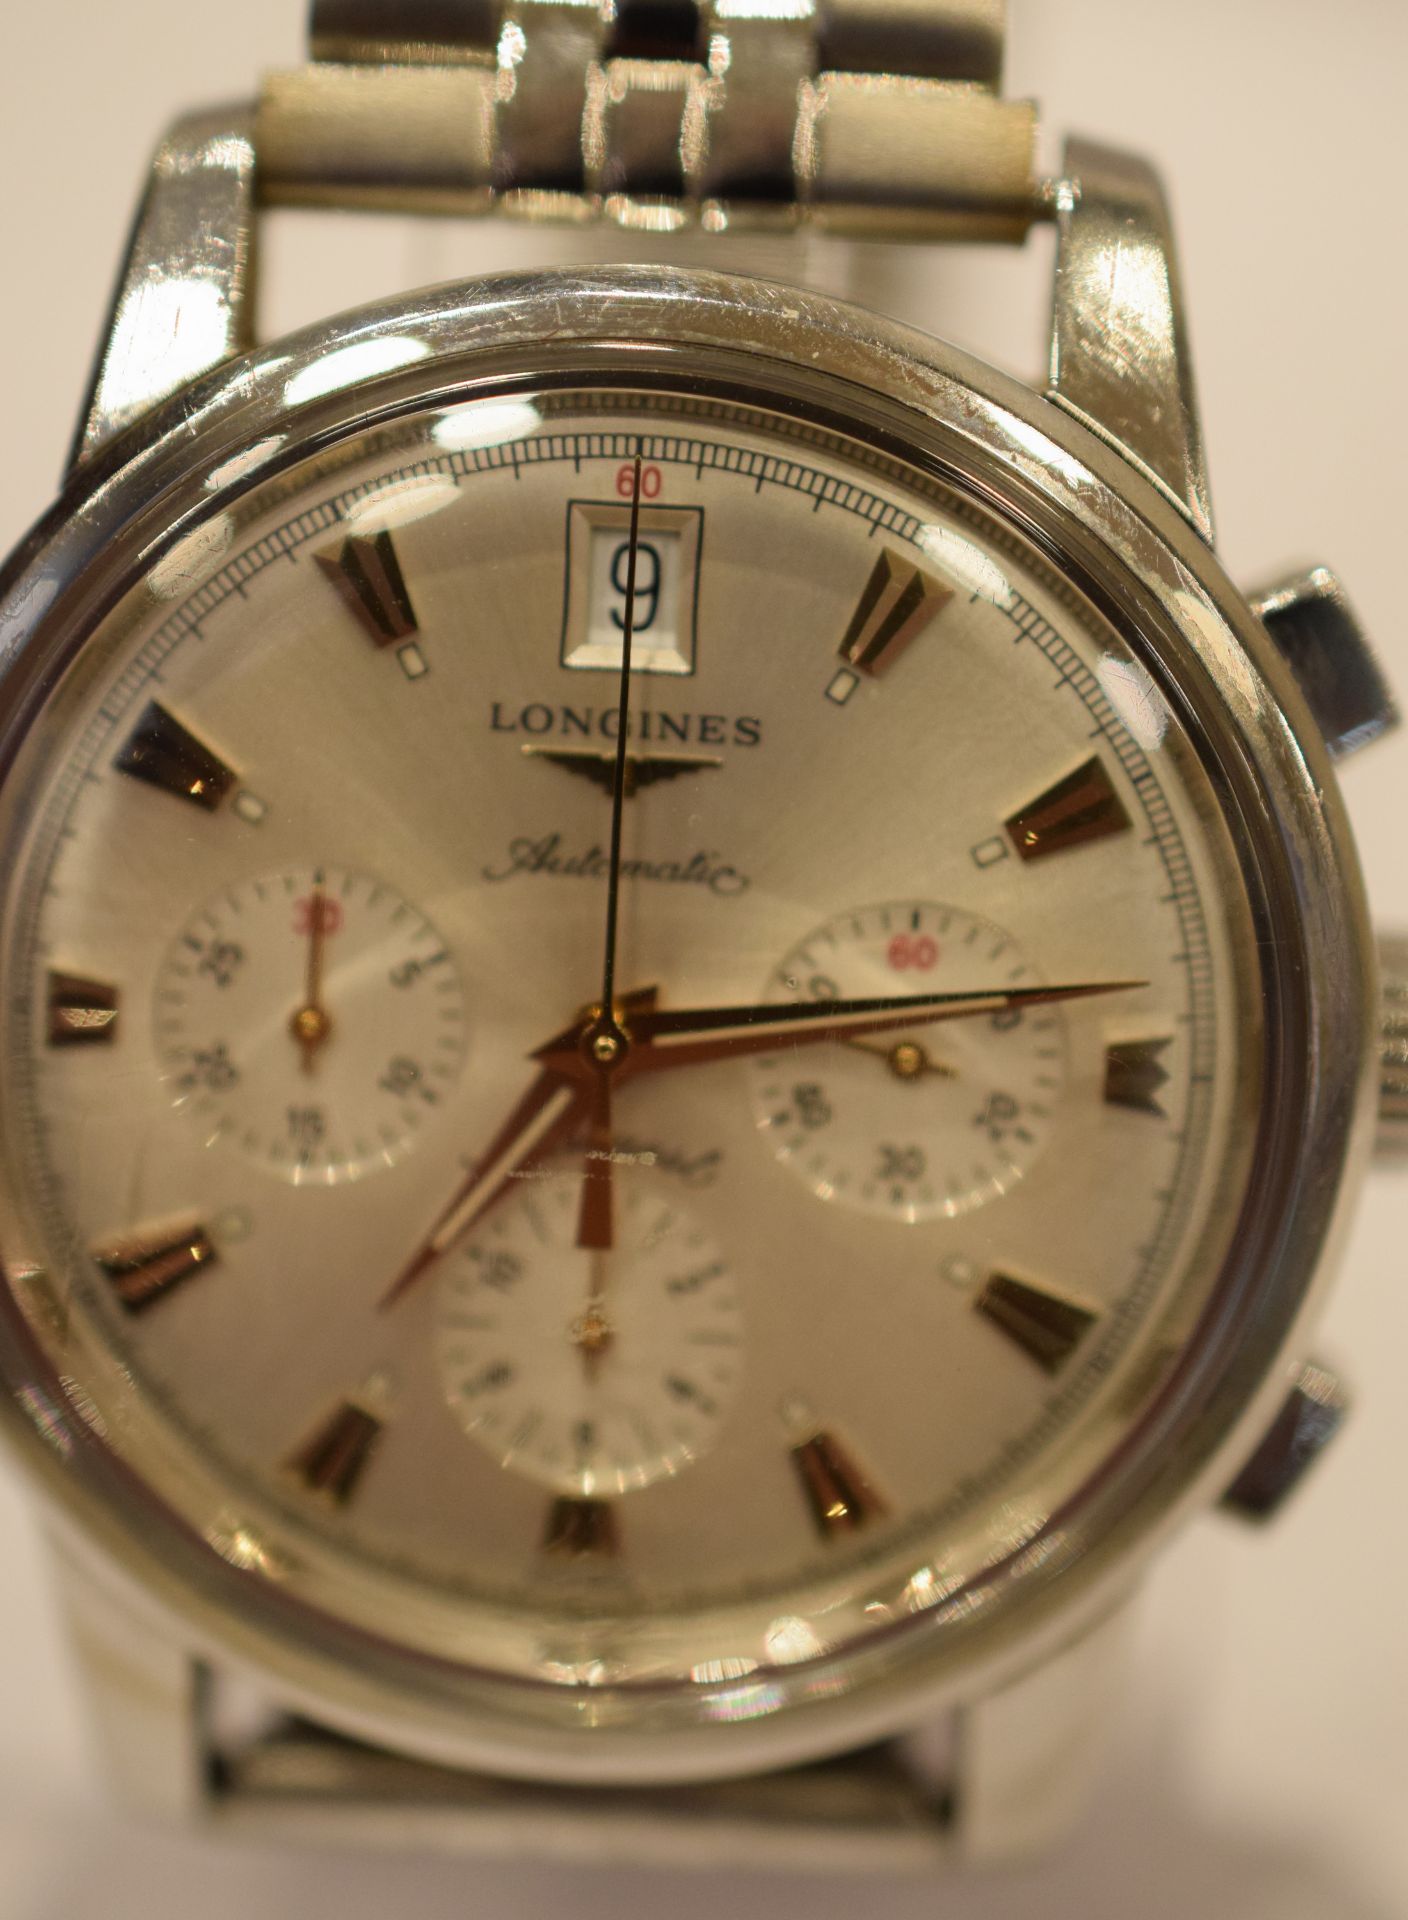 Longines Conquest Chrono Date Chronograph - Image 2 of 4